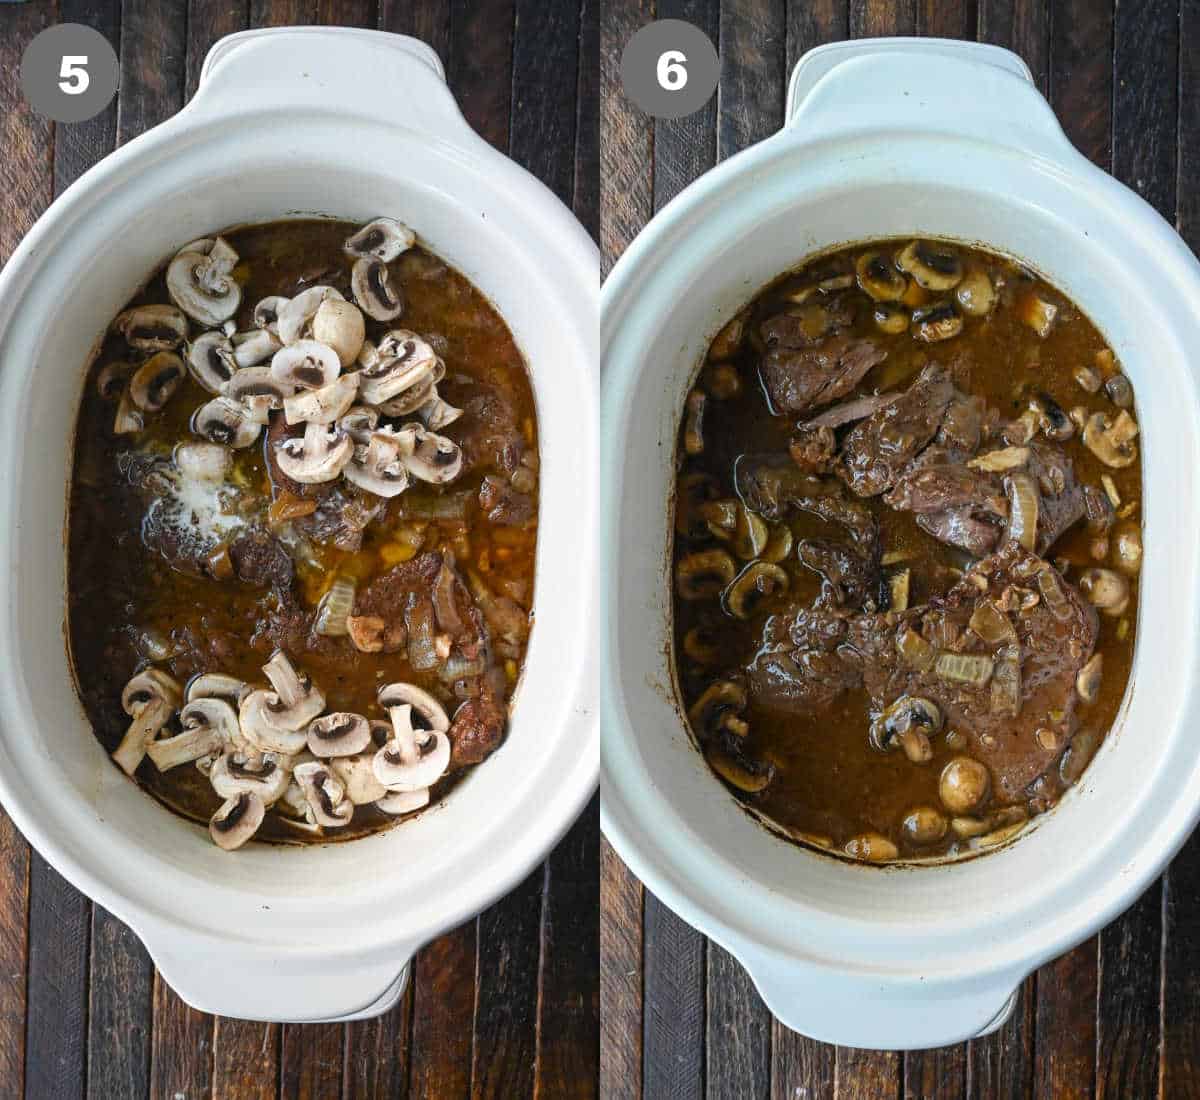 Sliced mushrooms and cornstarch added into the slow cooker.